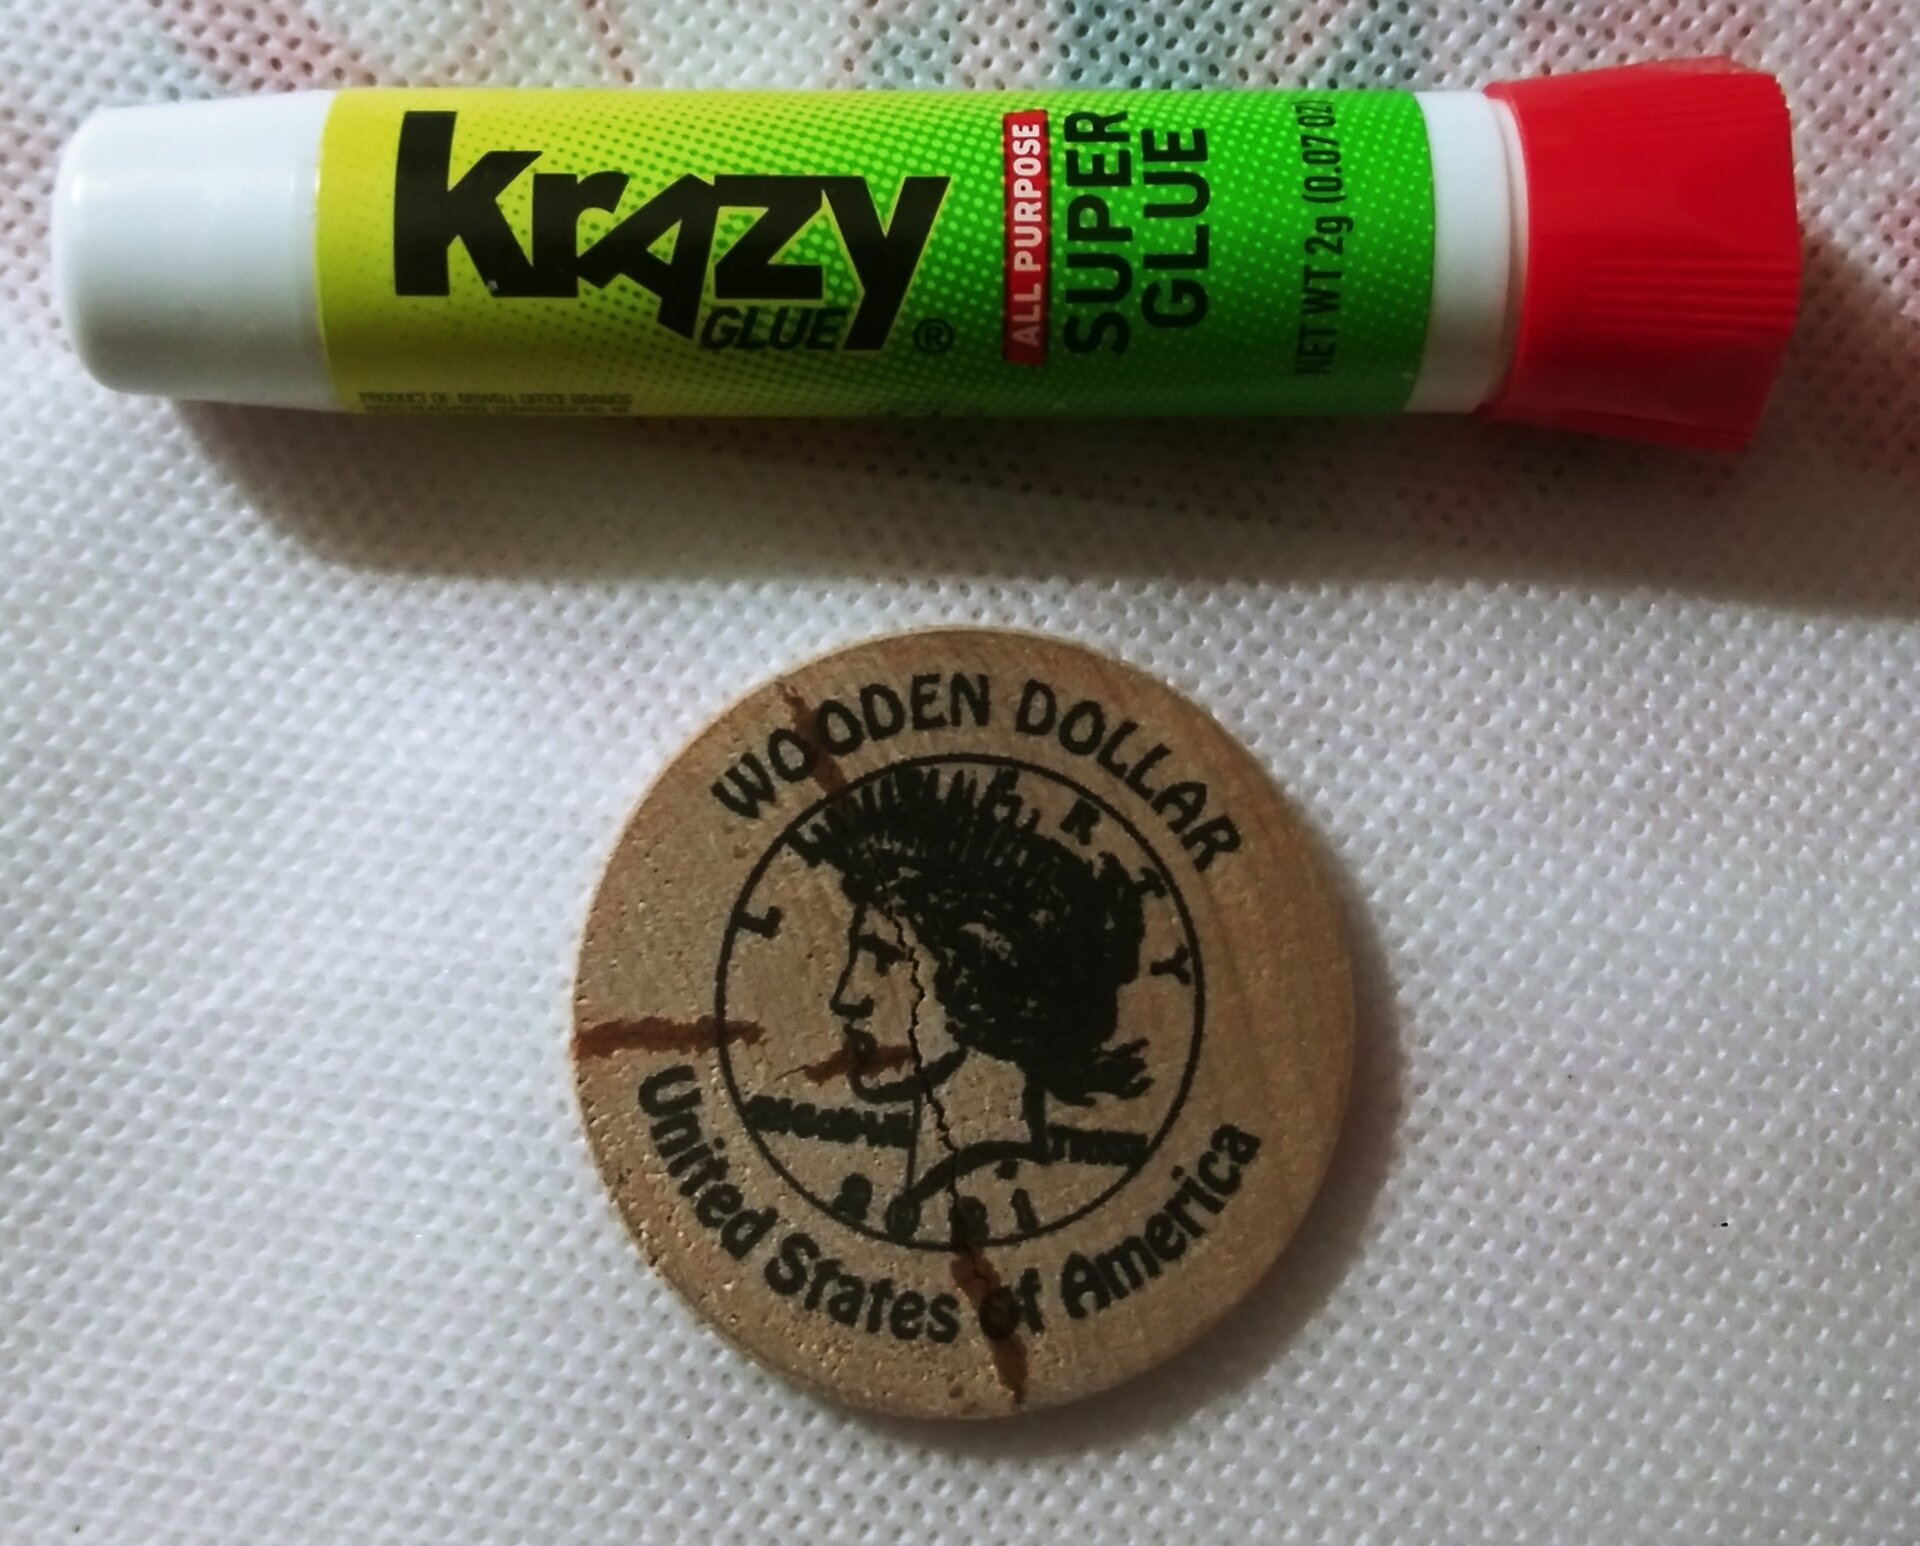 How to fix a coin broken in 3 parts - Krazy Glue!